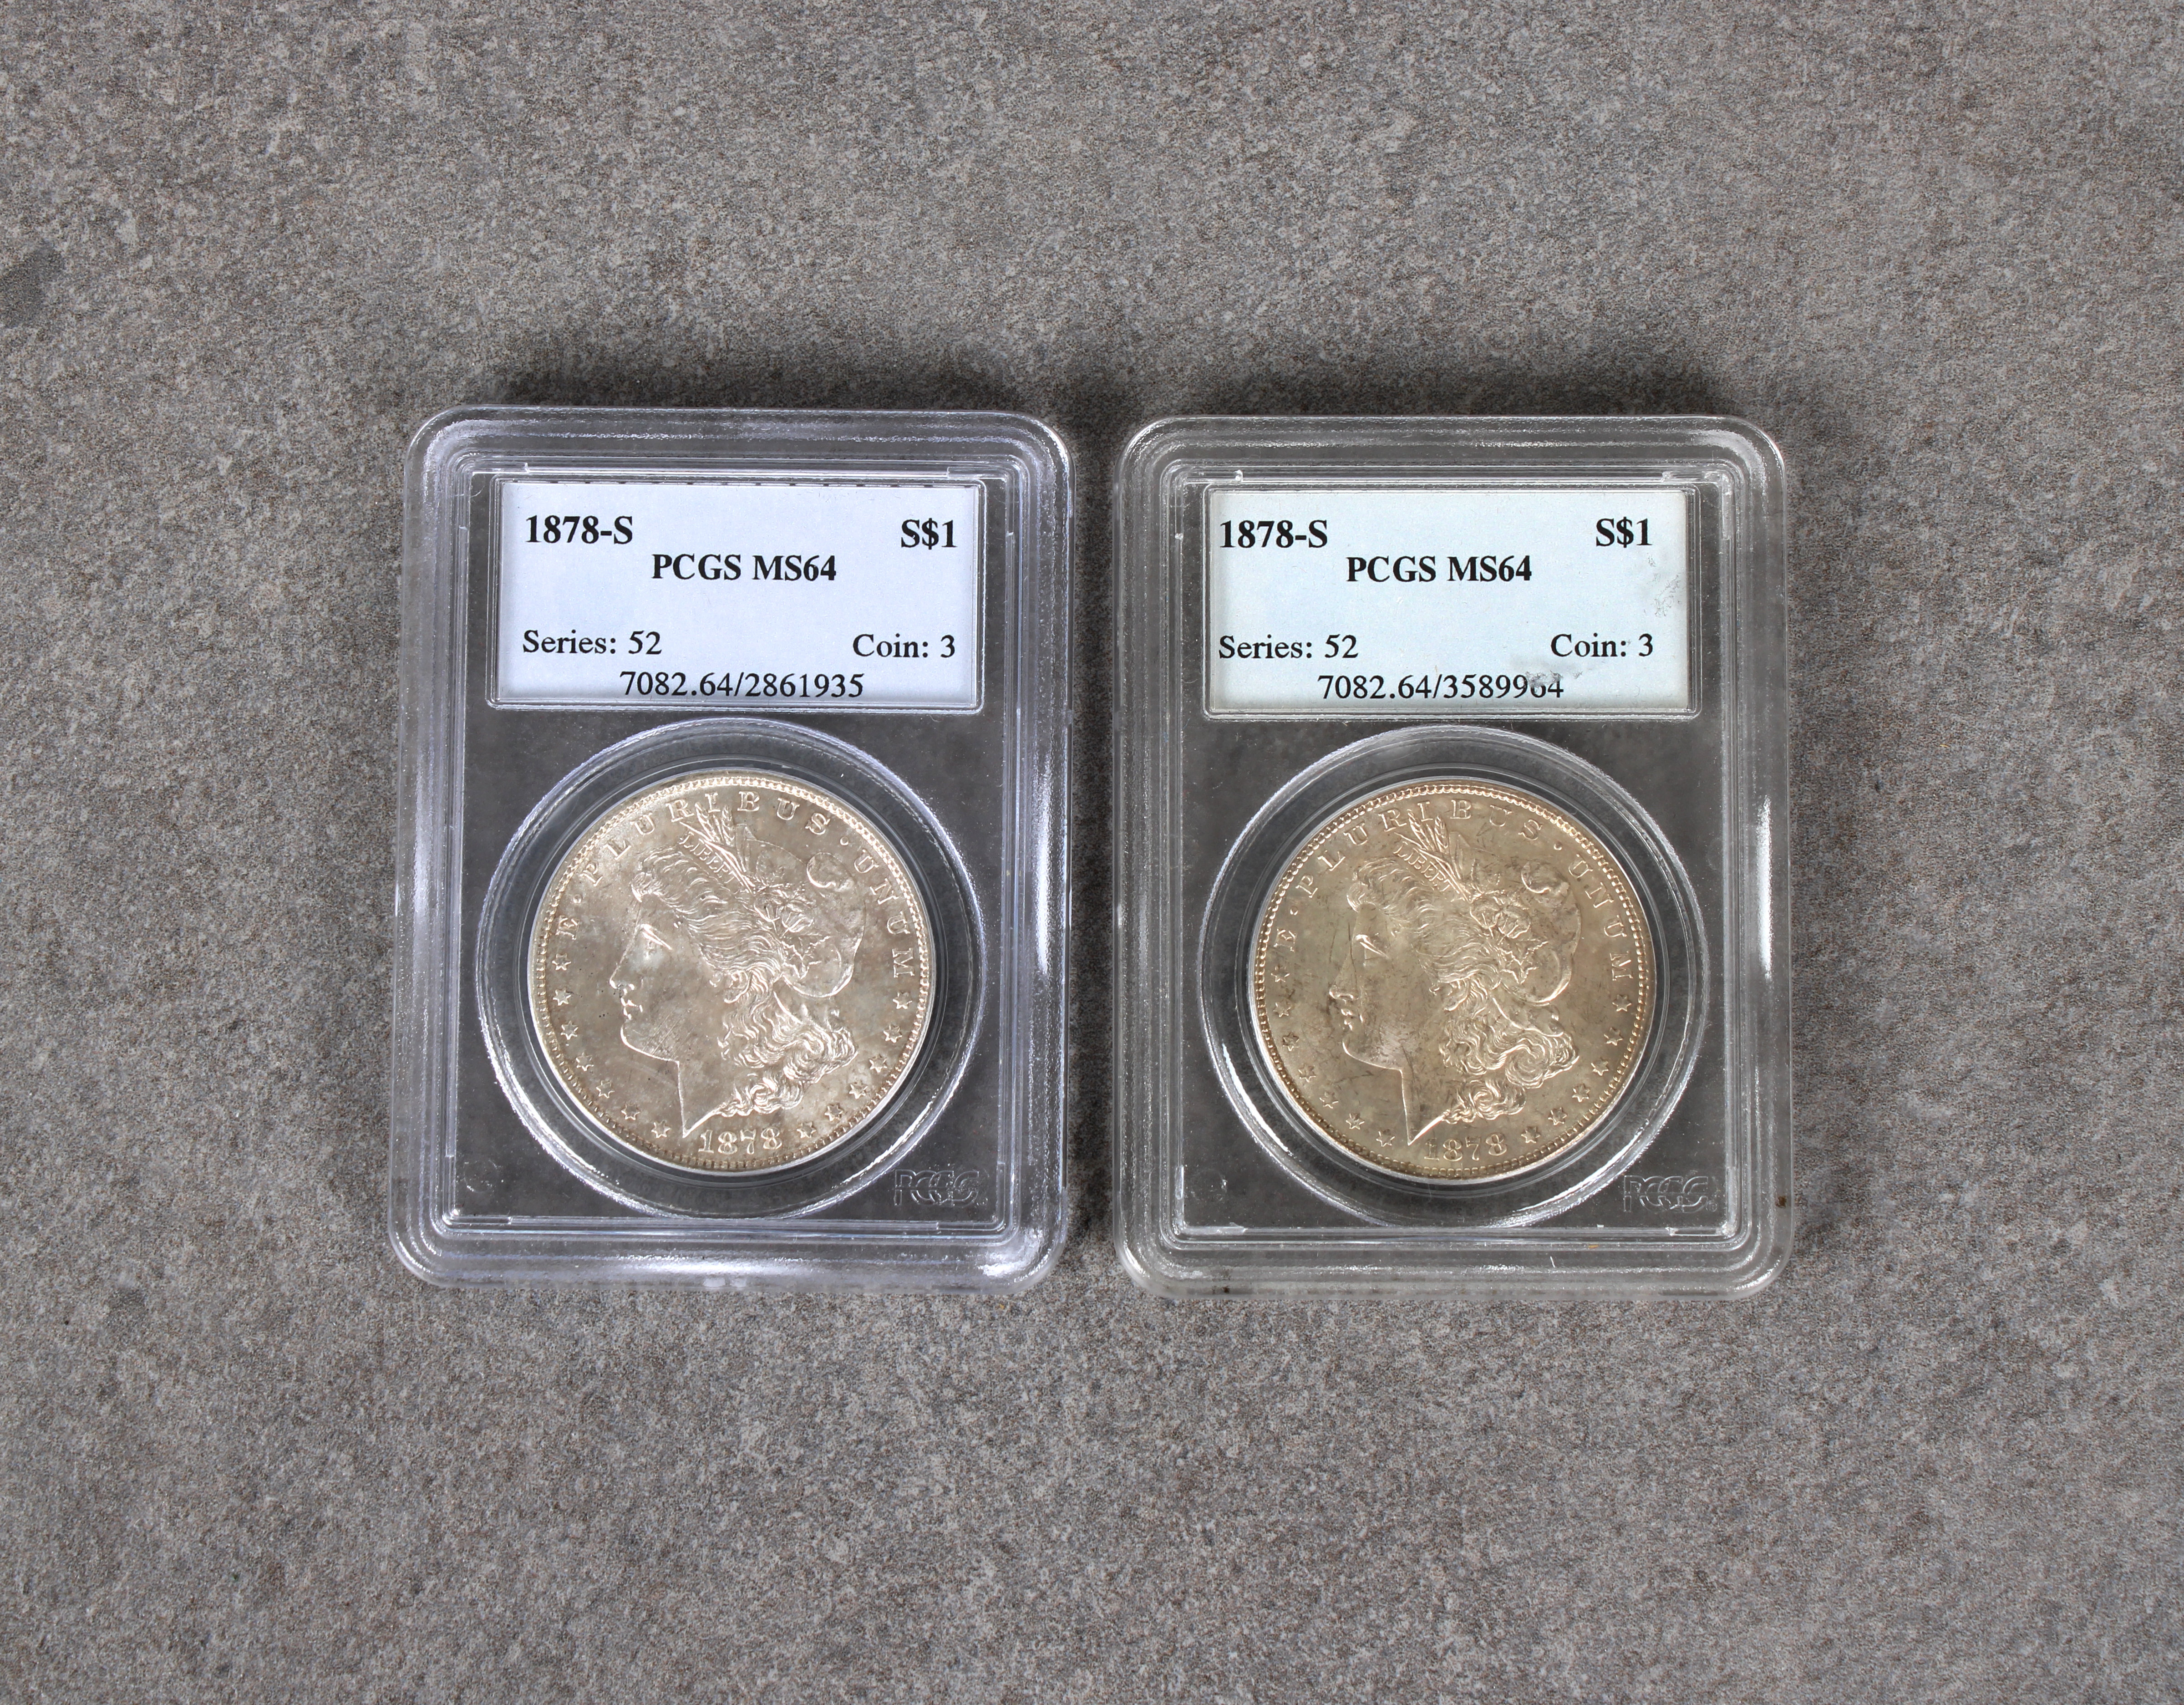 Two x 1878-S Morgan Dollar series: 52 coin: 3 - PCGS graded